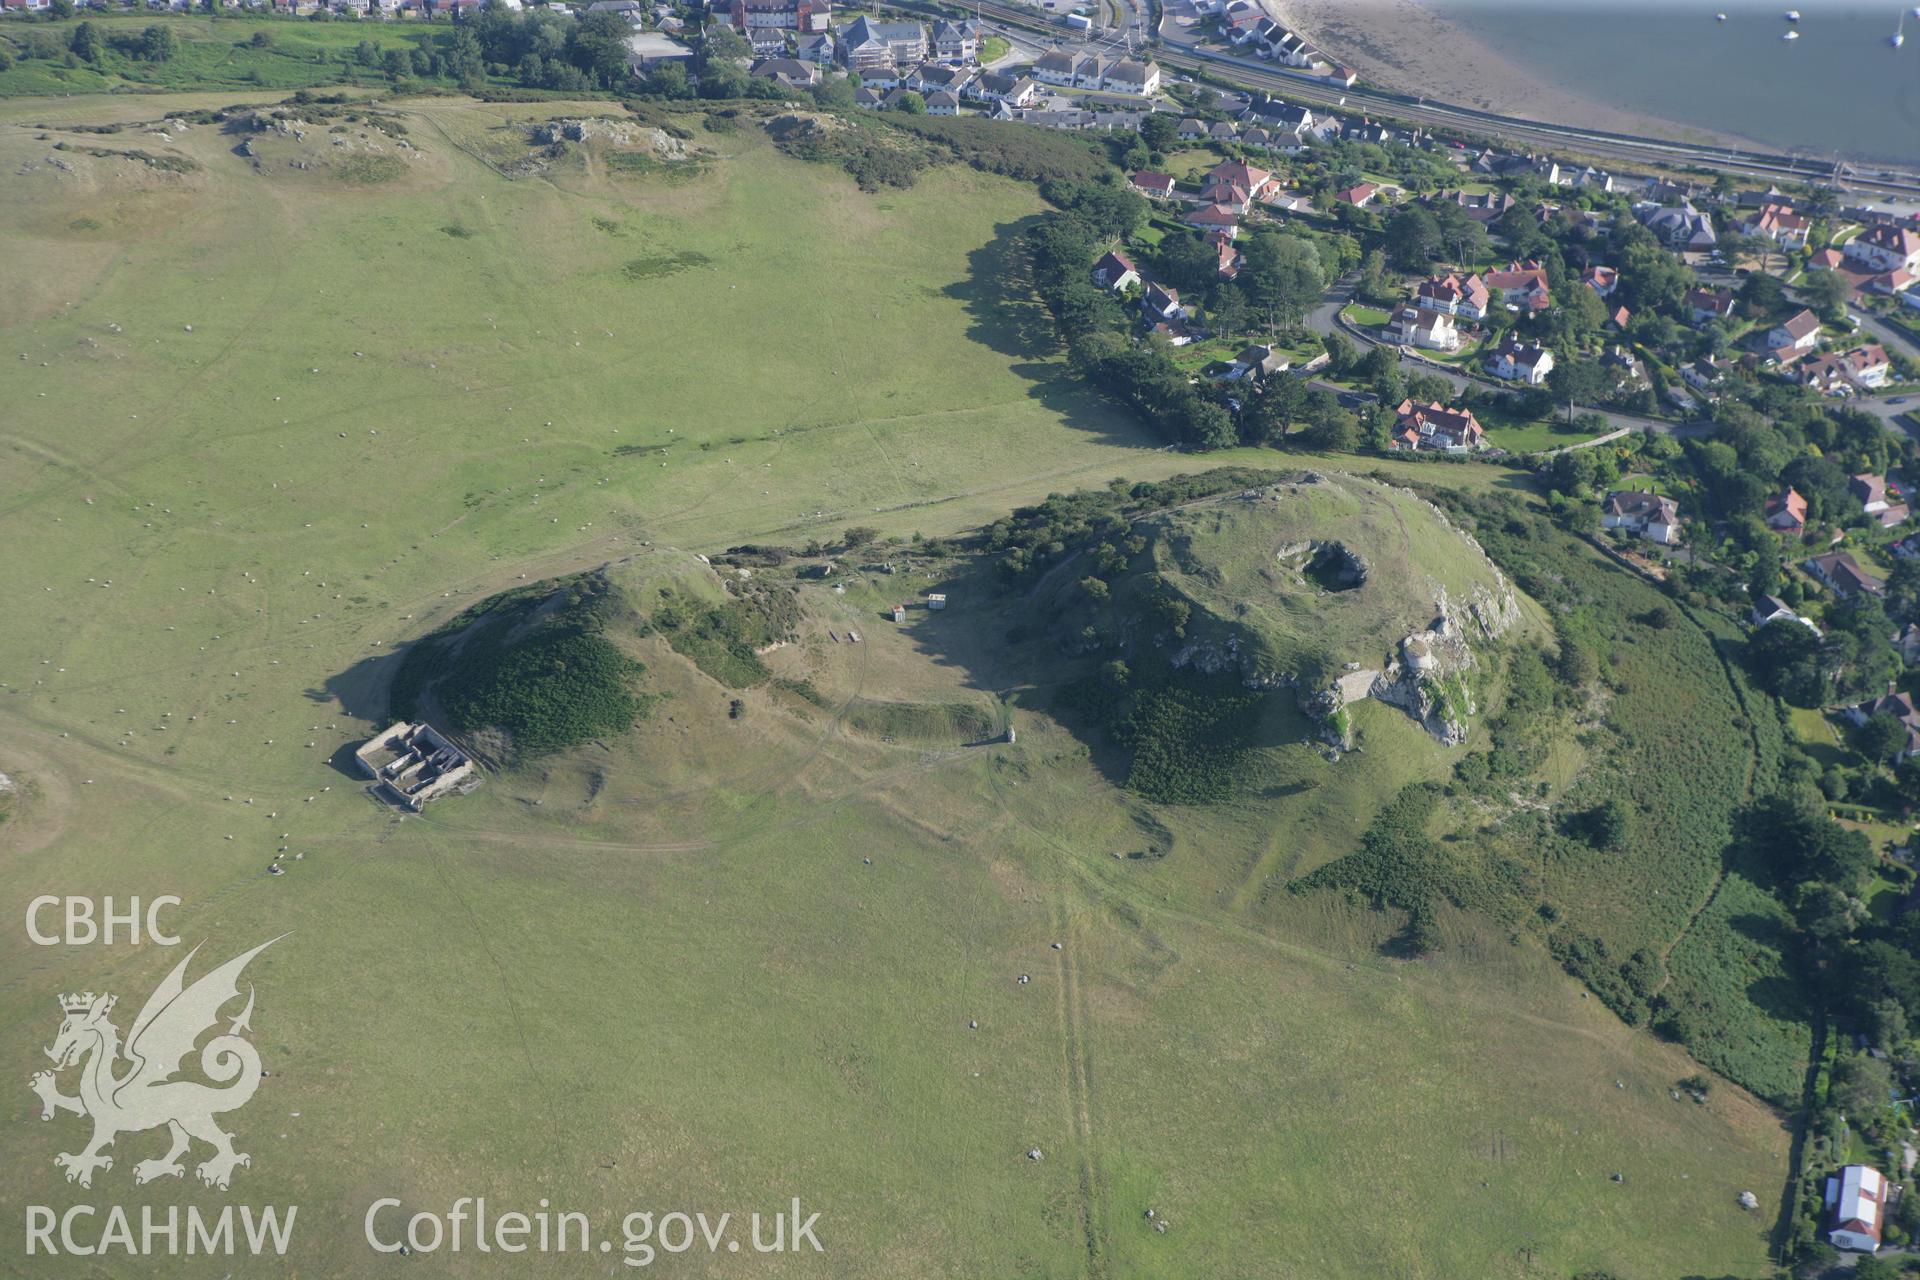 RCAHMW colour oblique photograph of Deganwy Castle. Taken by Toby Driver and Oliver Davies on 27/07/2011.